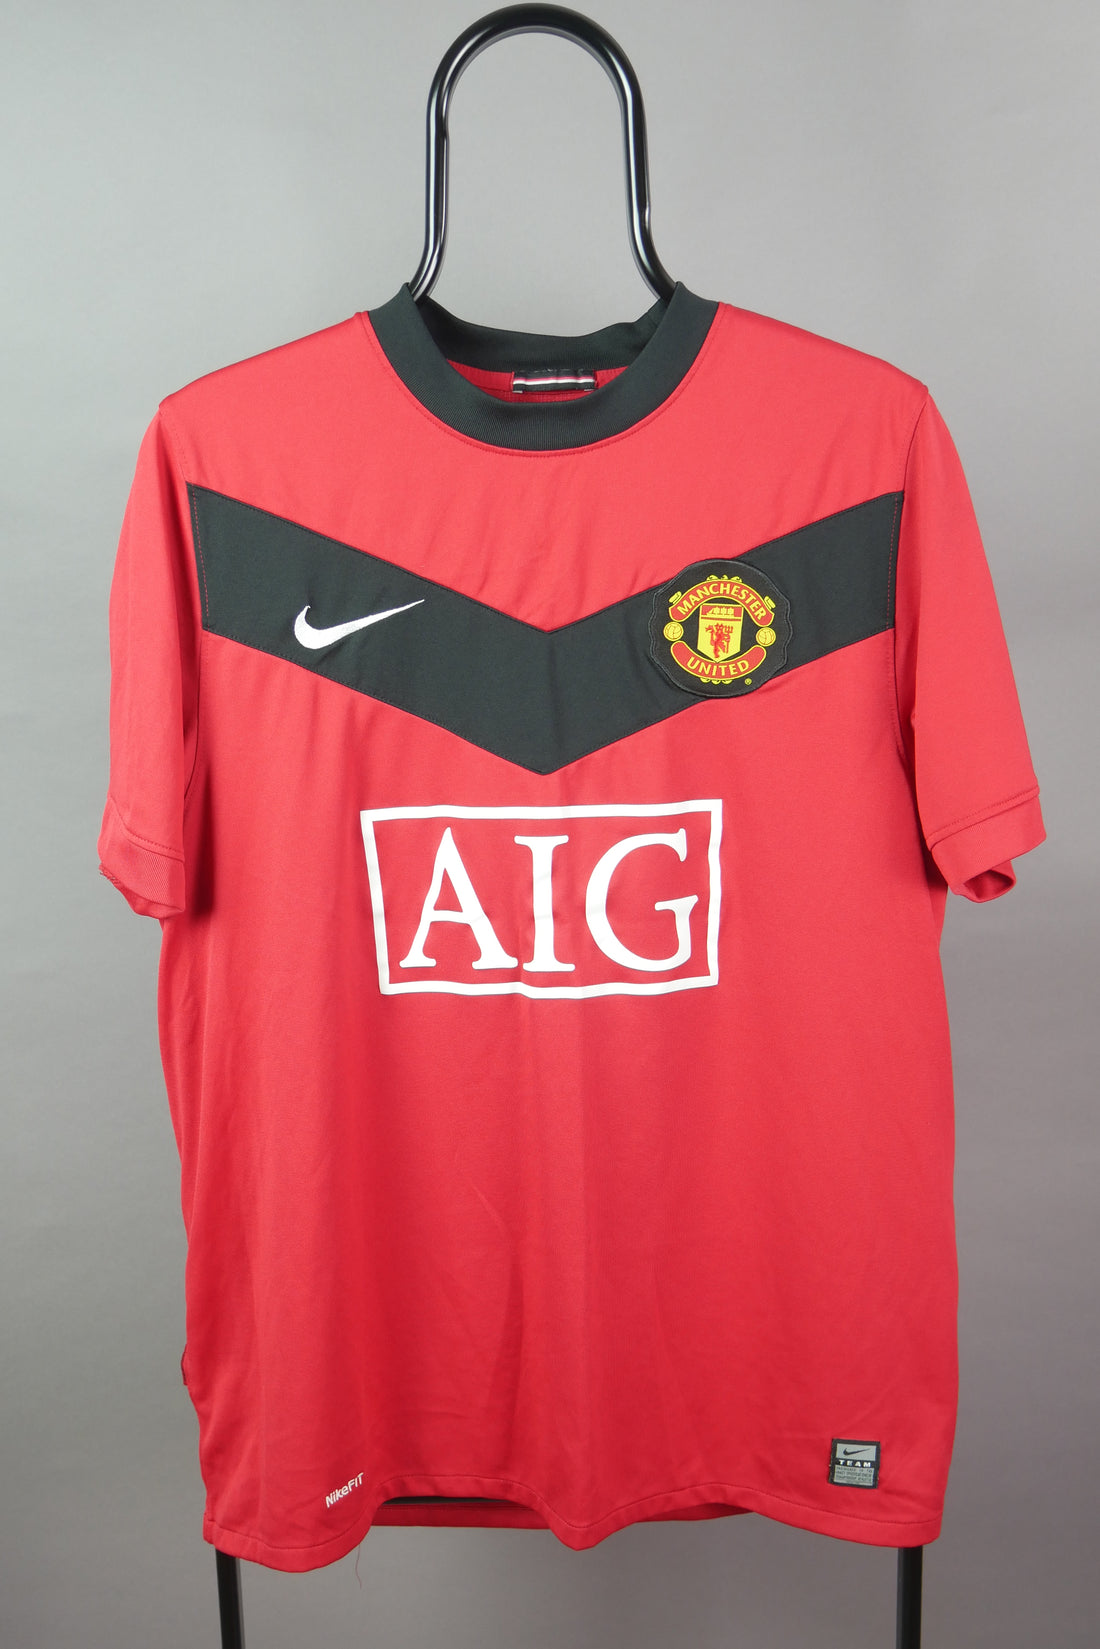 The Manchester United 2009 Shirt (M)